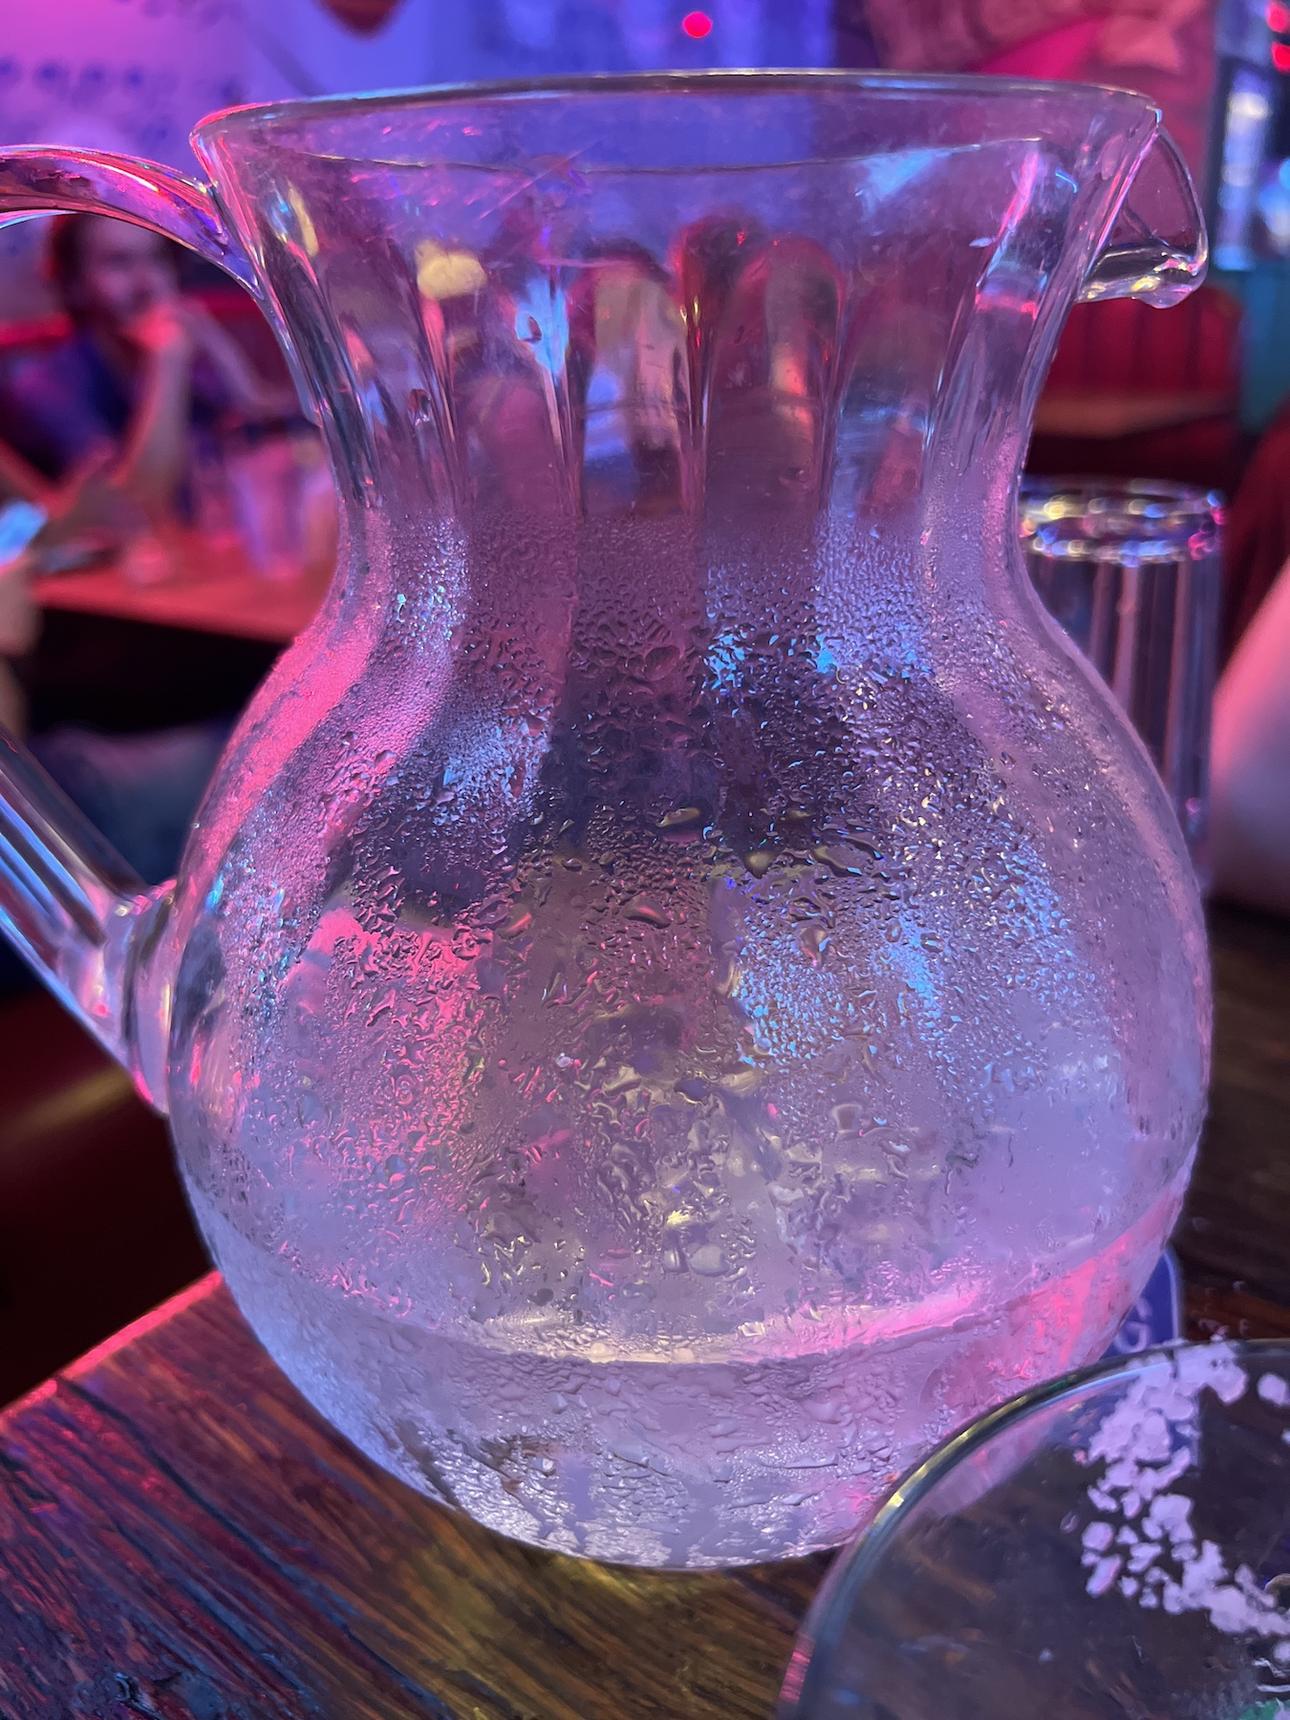 A jug of water and ice colored with pinks and purples from the mood lights